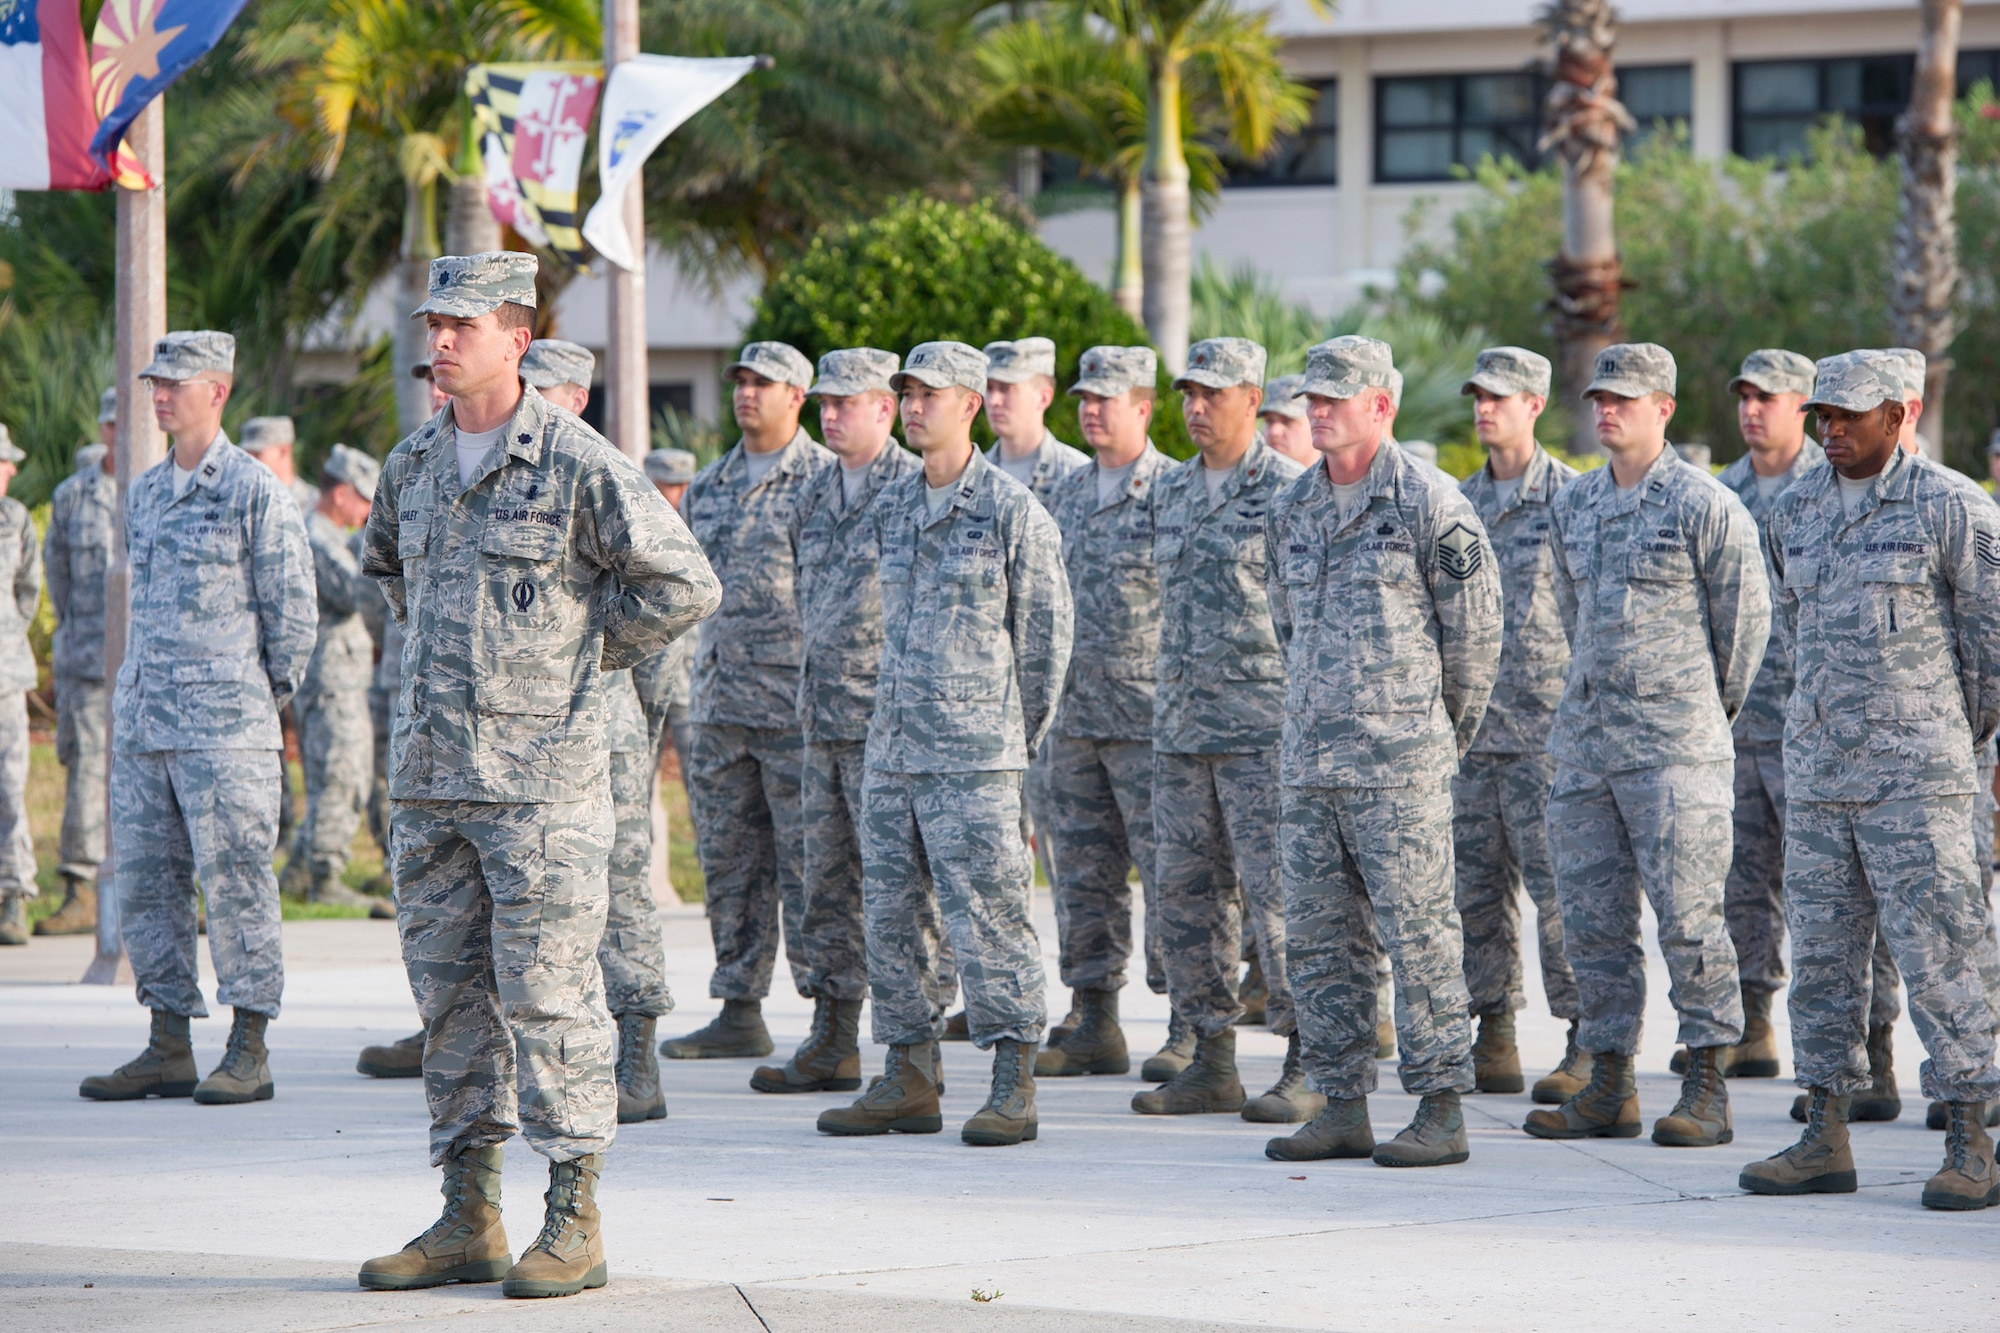 Lt. Col. David Ashley, commander, 5th Space Launch Squadron, leads Airmen during the Patriot's Day Memorial Service held Sept. 11 at Memorial Plaza on Patrick Air Force Base. The 45th Launch Group took the lead on organizing the event. (U.S. Air Force Photo/Matthew Jurgens)